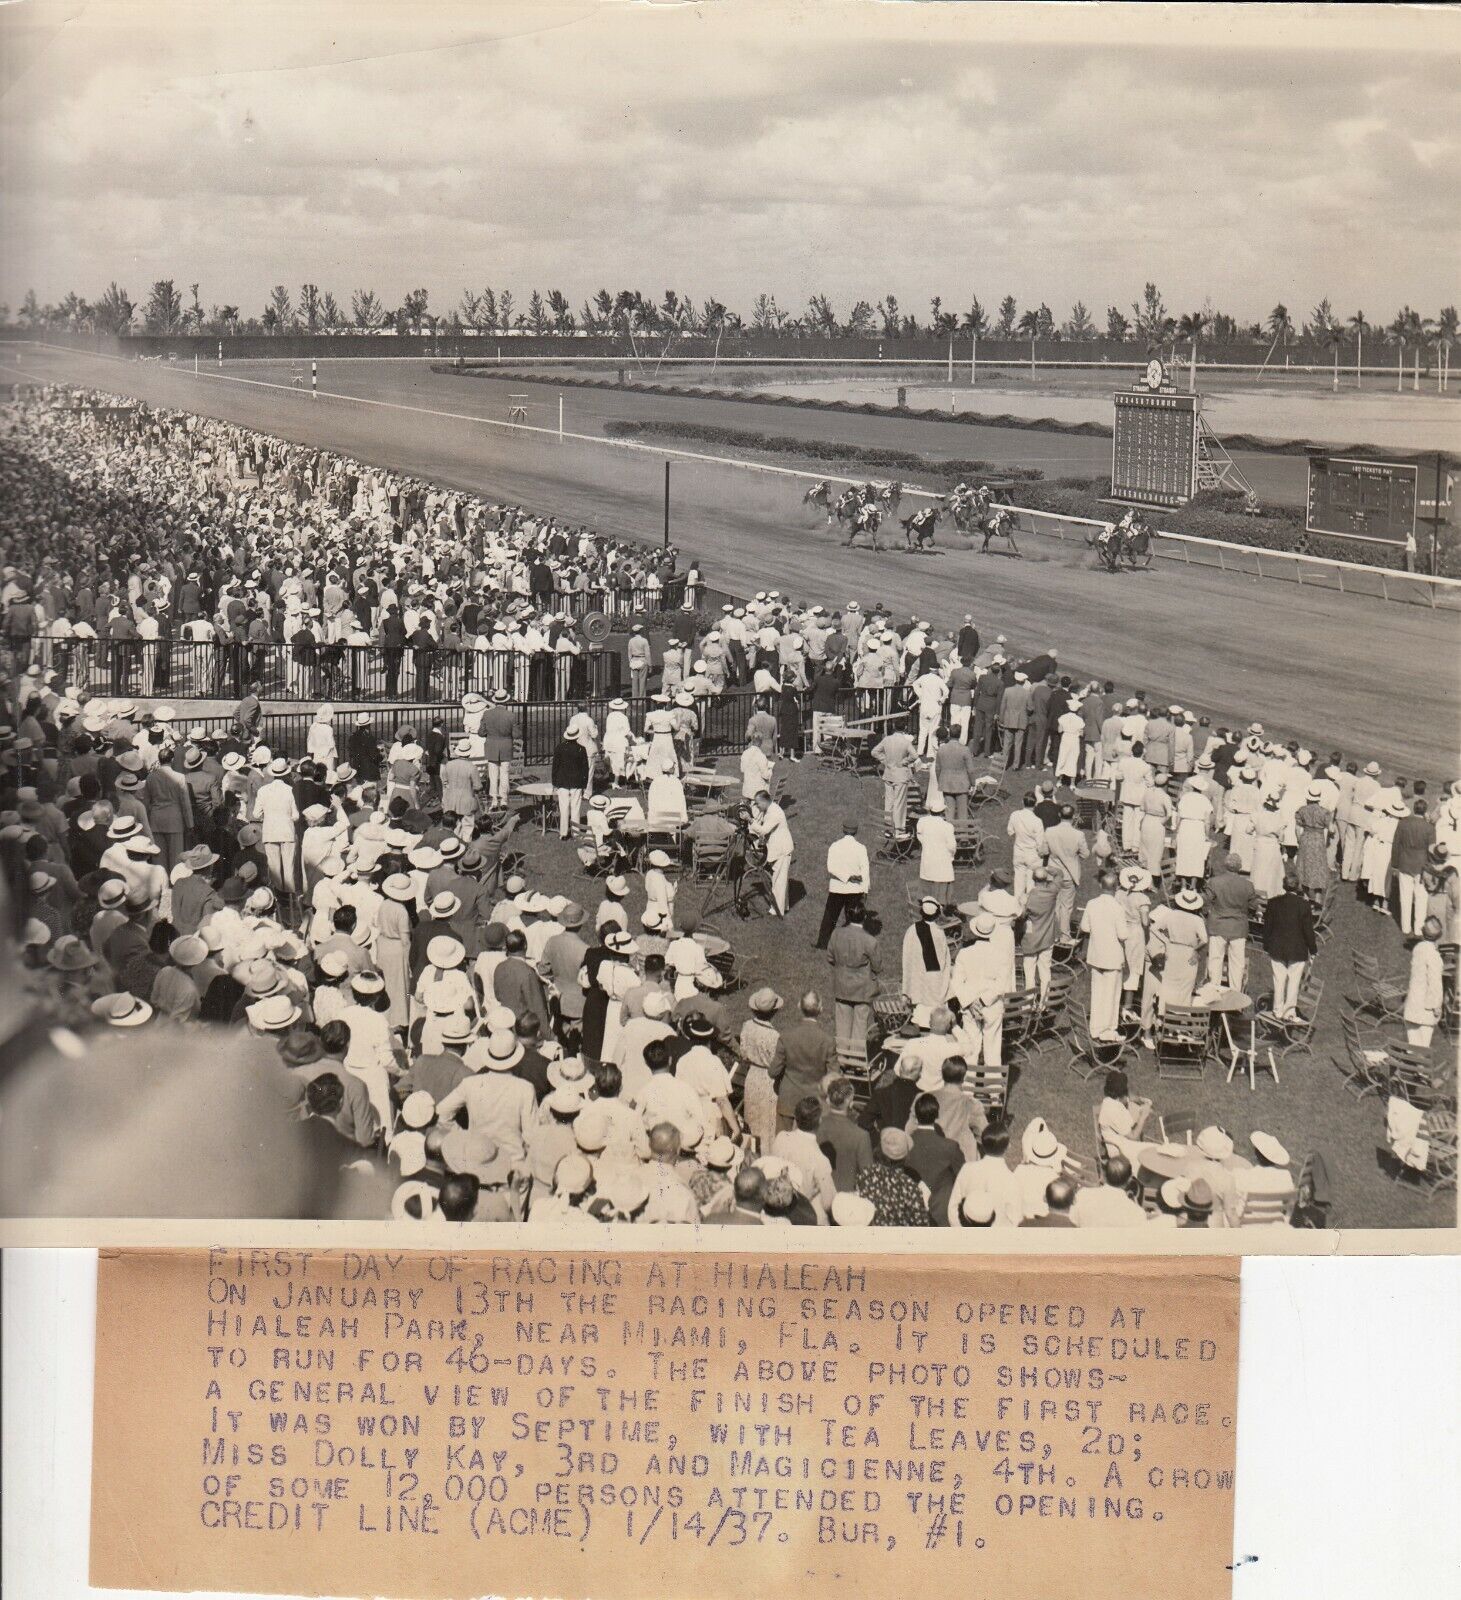 1937 Press Photo - FIRST DAY OF RACING AT HIALEAH     -  HORSE RACE RACING 